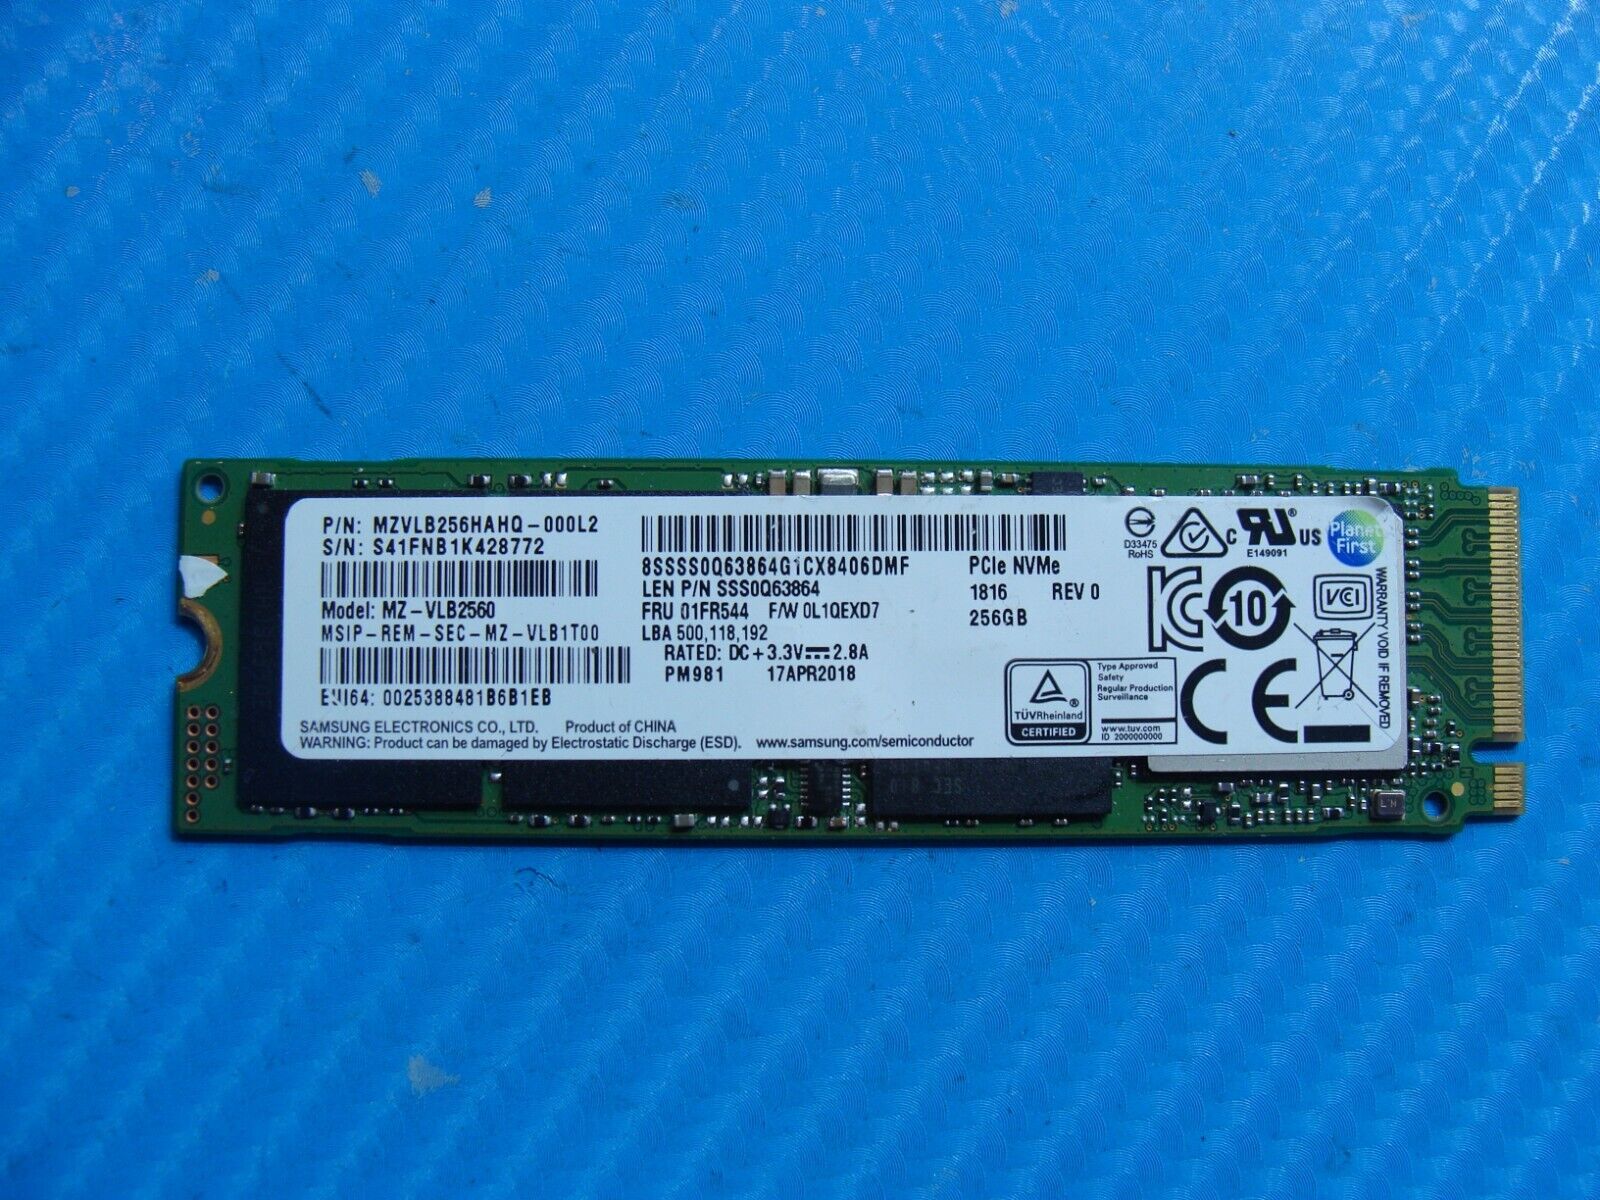 HP 15 G3 Samsung 256GB NVMe M.2 SSD Solid State Drive MZVLB256HAHQ-000L2